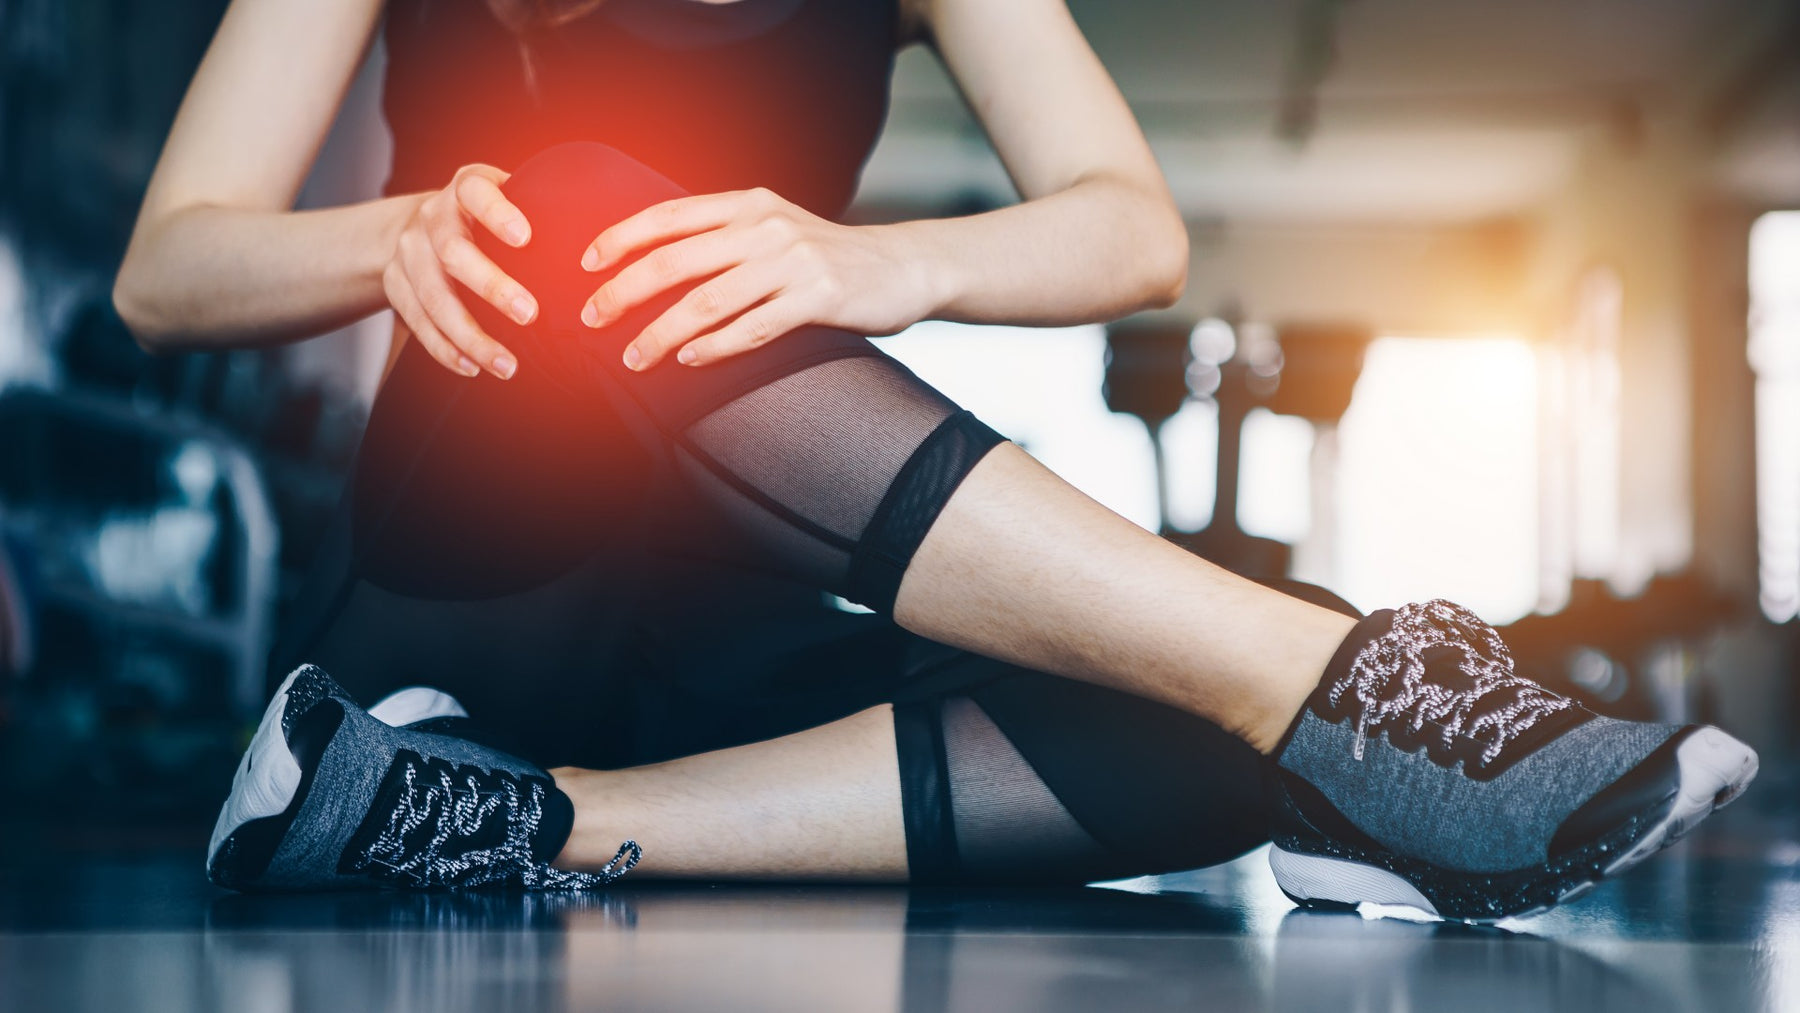 8 Tips to Avoid Gym Injuries in 2018